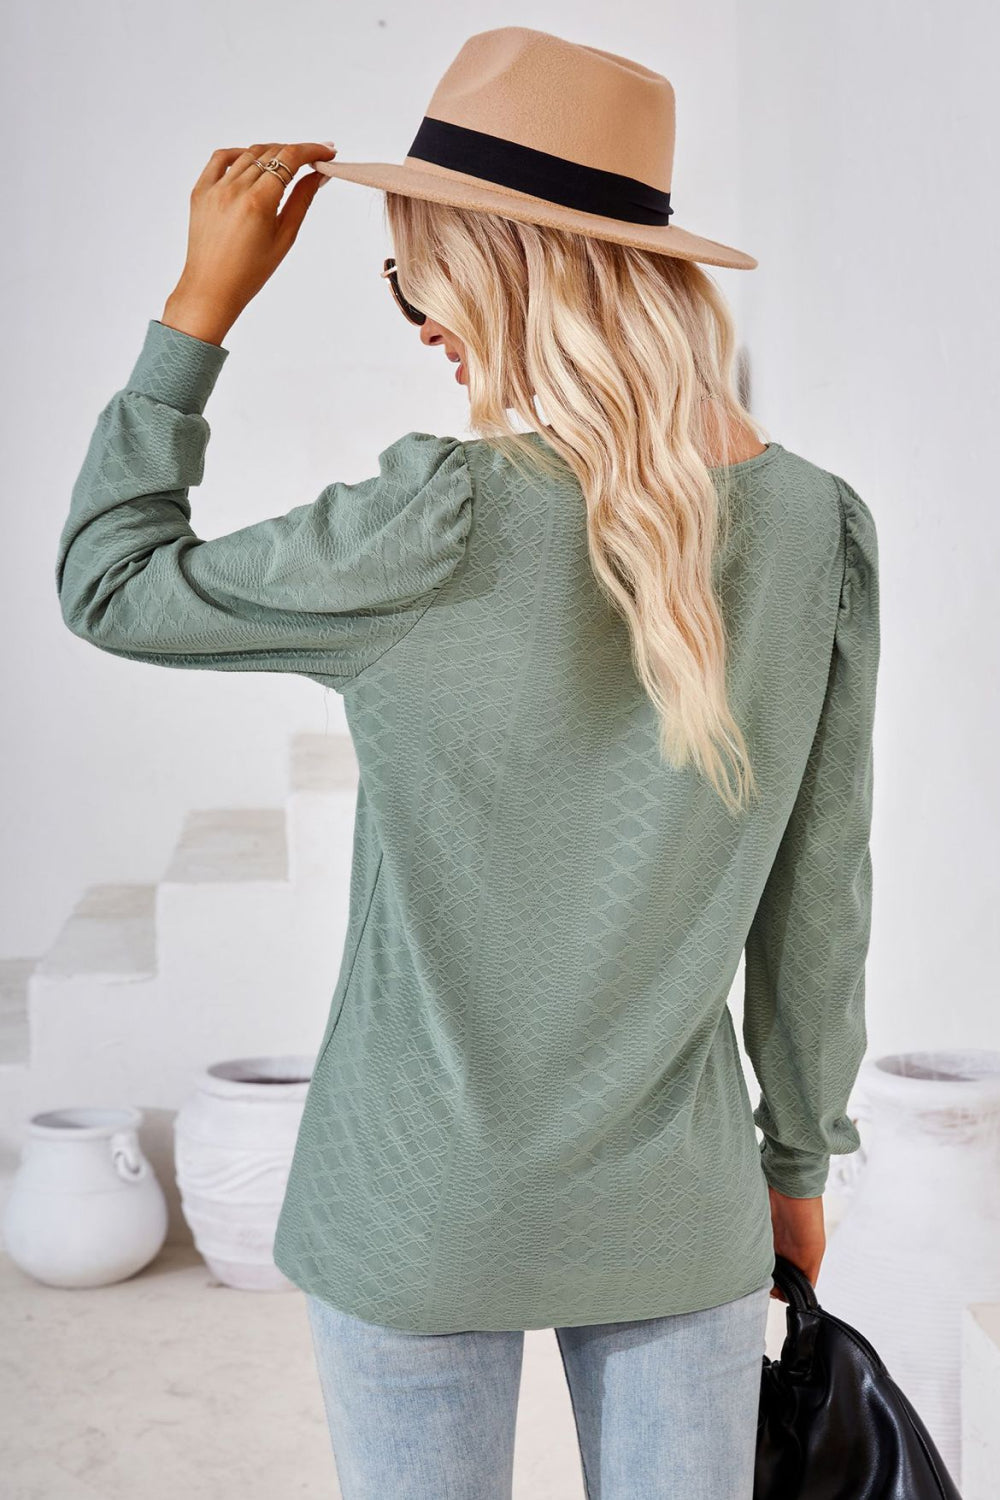 Square Neck Puff Sleeve Blouse - Women’s Clothing & Accessories - Shirts & Tops - 28 - 2024